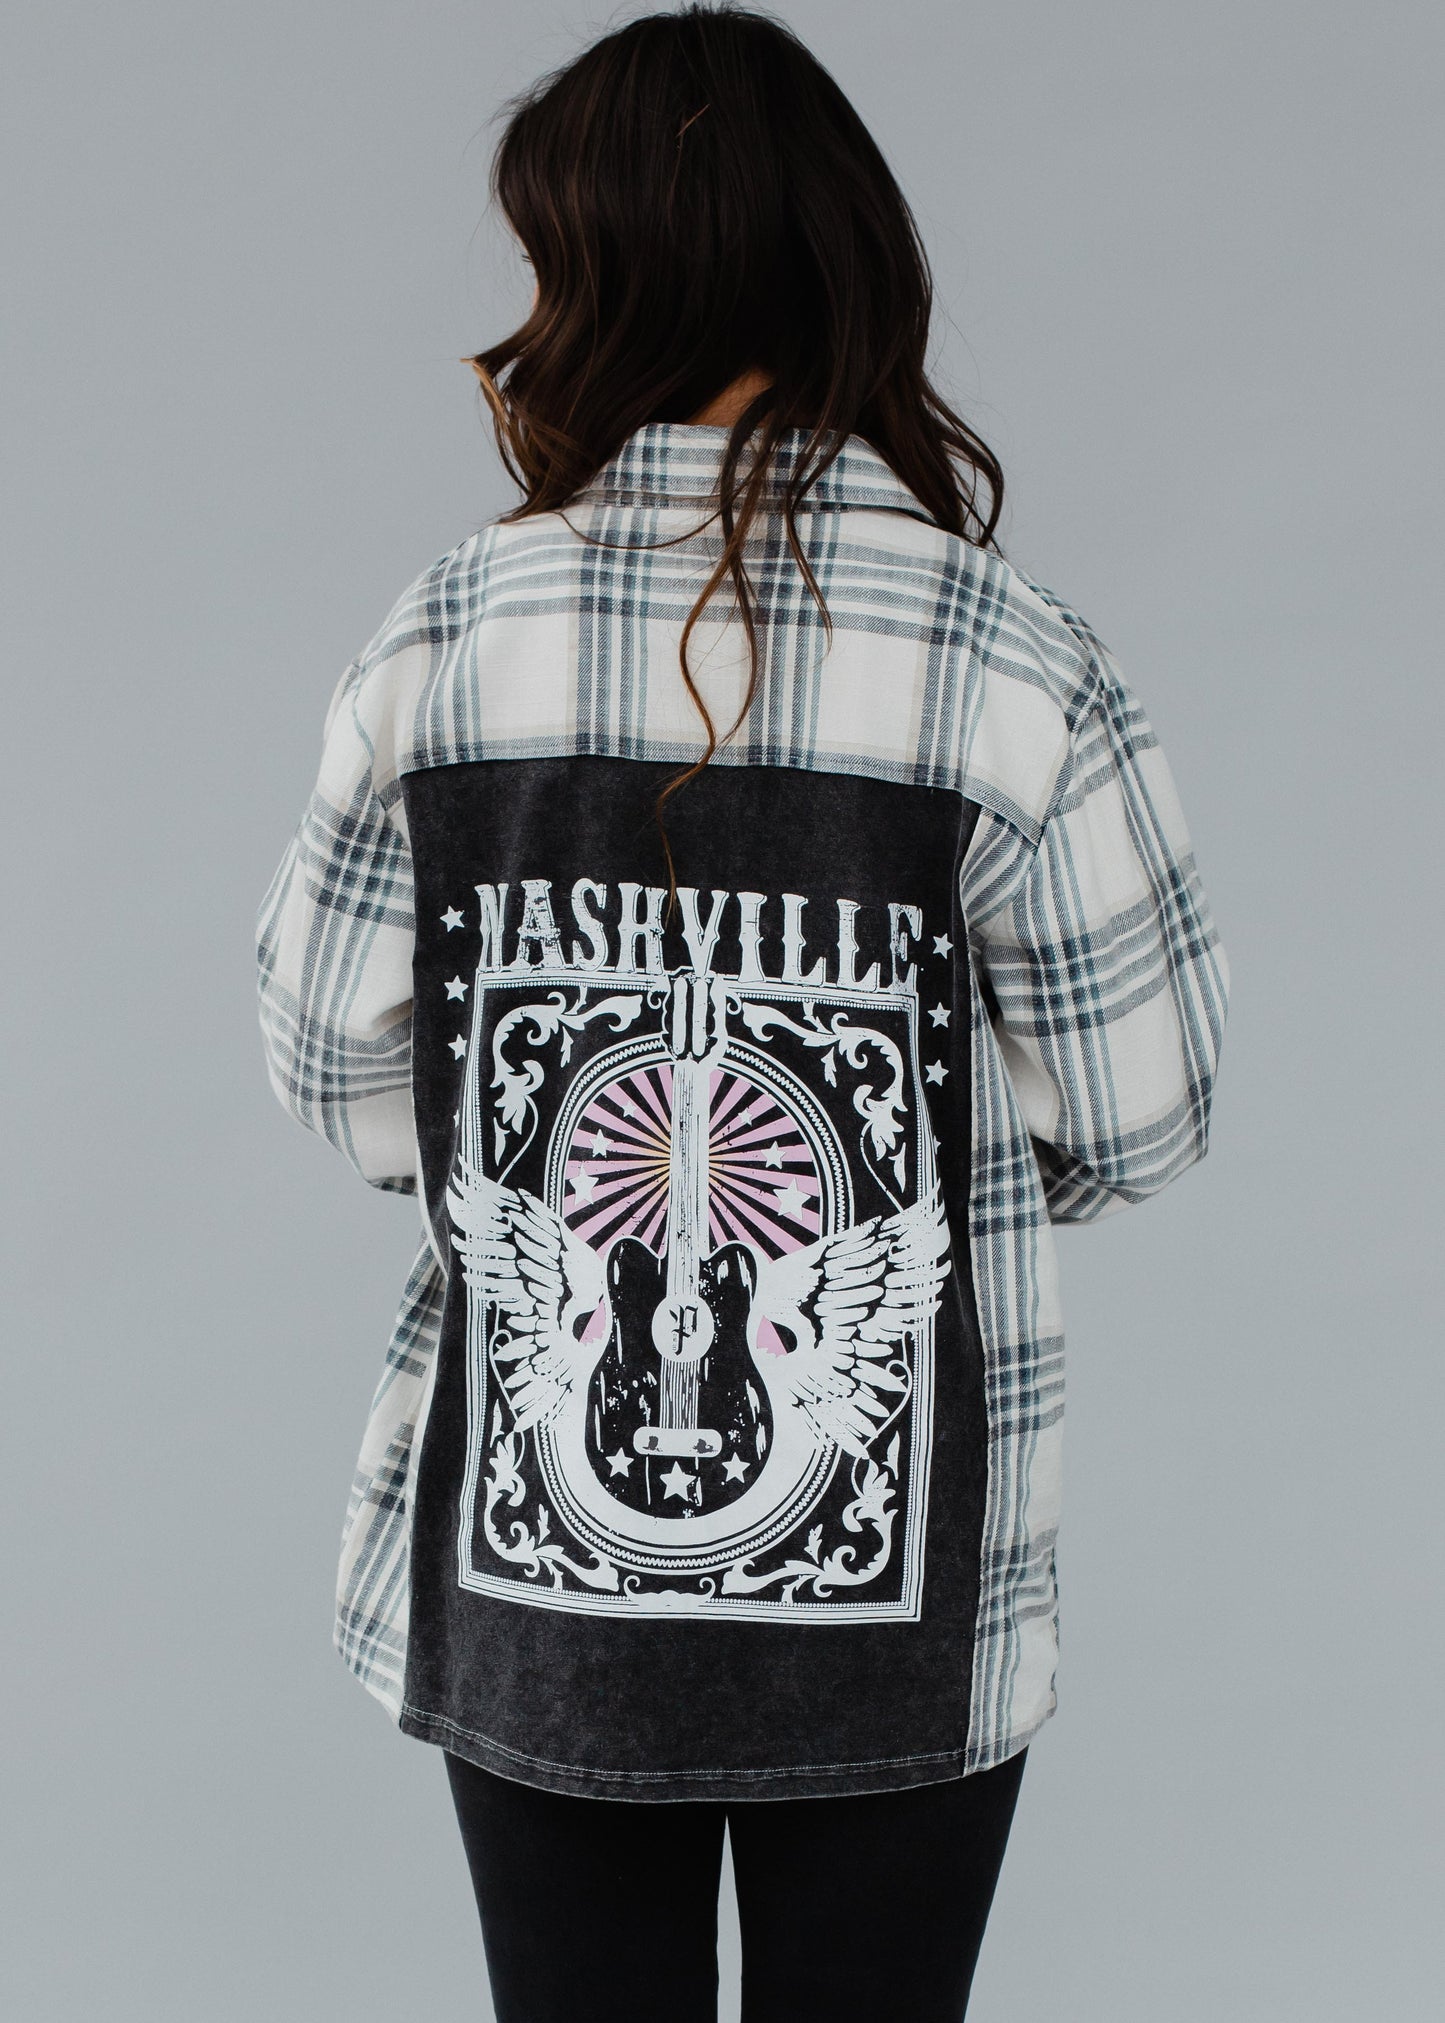 White, tan and blue Nashville flannel